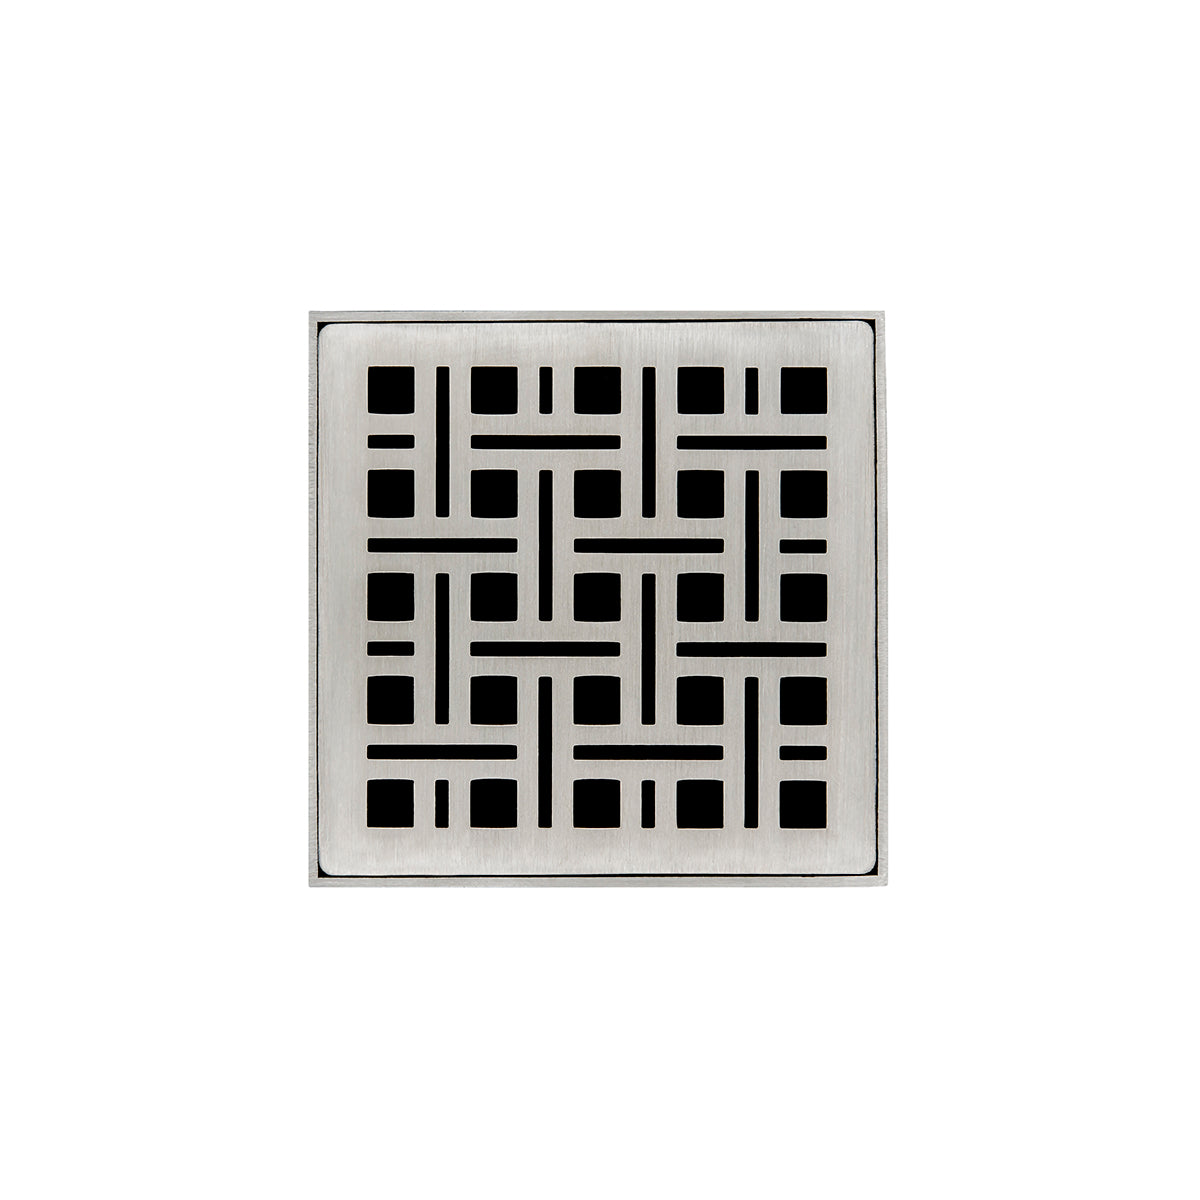 Infinity Drain 4" x 4" VD 4 Premium Center Drain Kit with Weave Pattern Decorative Plate with Cast Iron Drain Body for Hot Mop, 2" Outlet